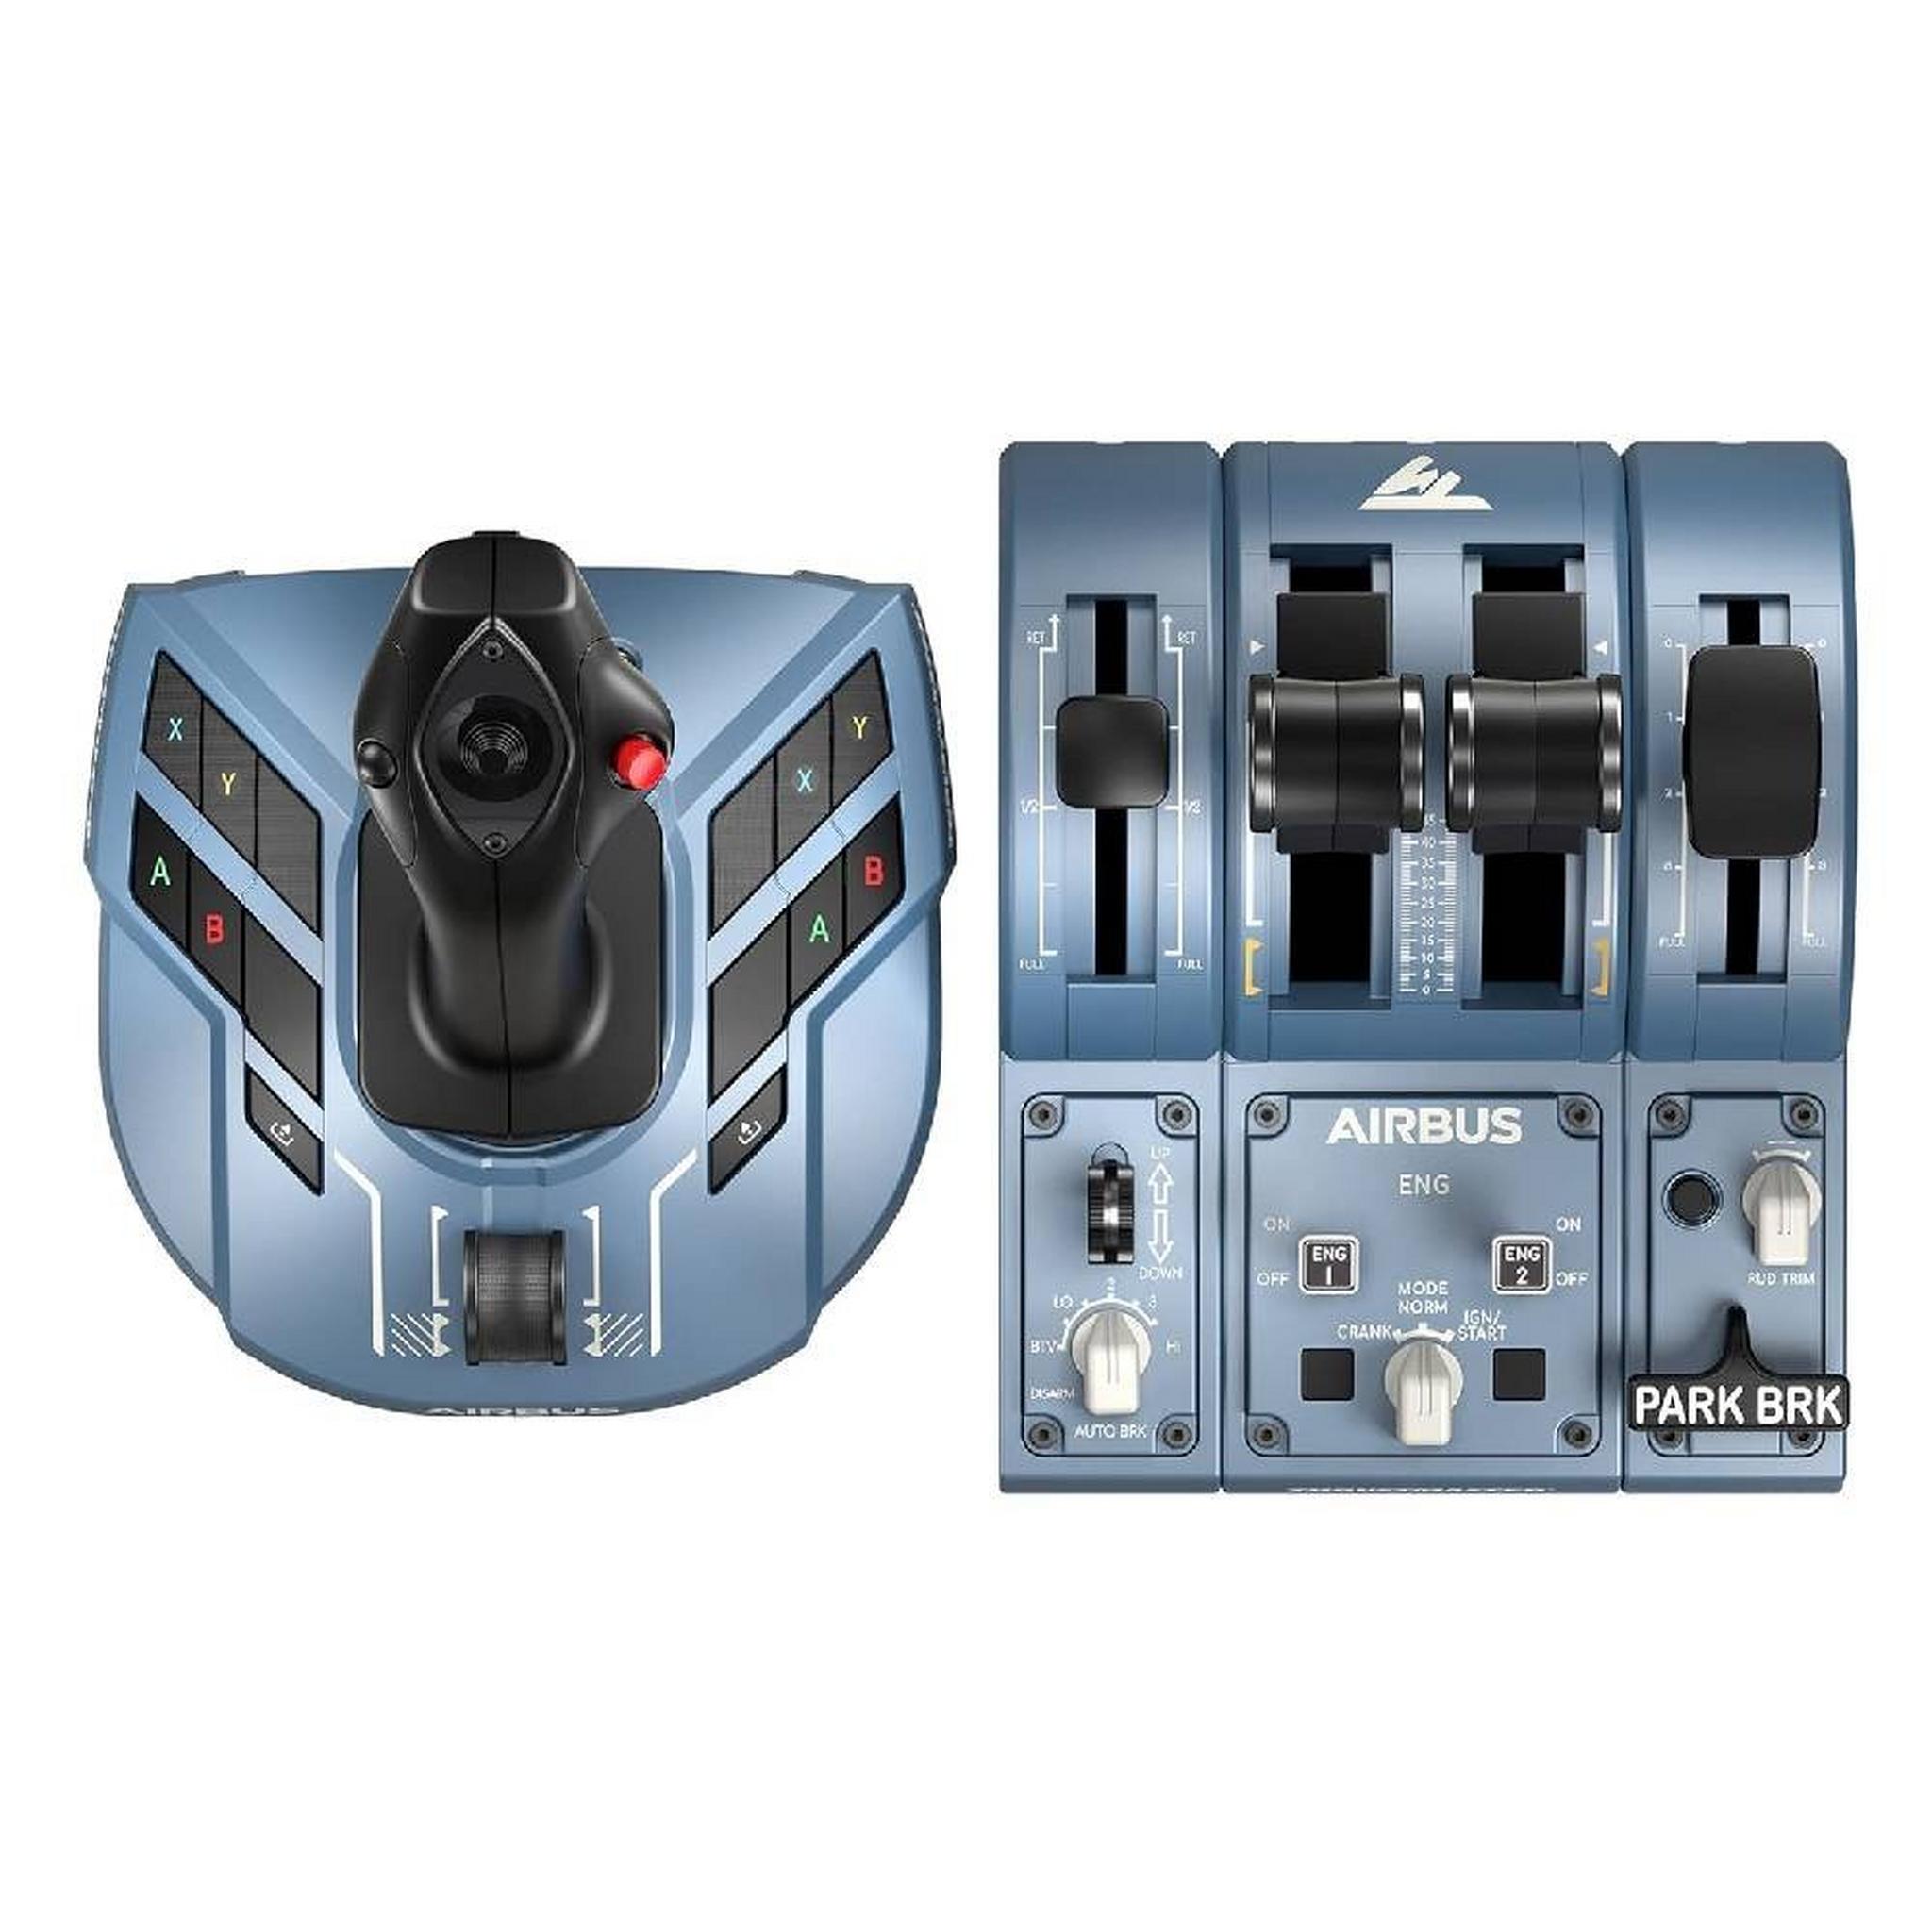 Thrustmaster TCA Captain Pack X Airbus Edition Sidestick and Quadrant for Xbox Series X|S & PC, TM-JSTK-CPTN-PACK - Blue